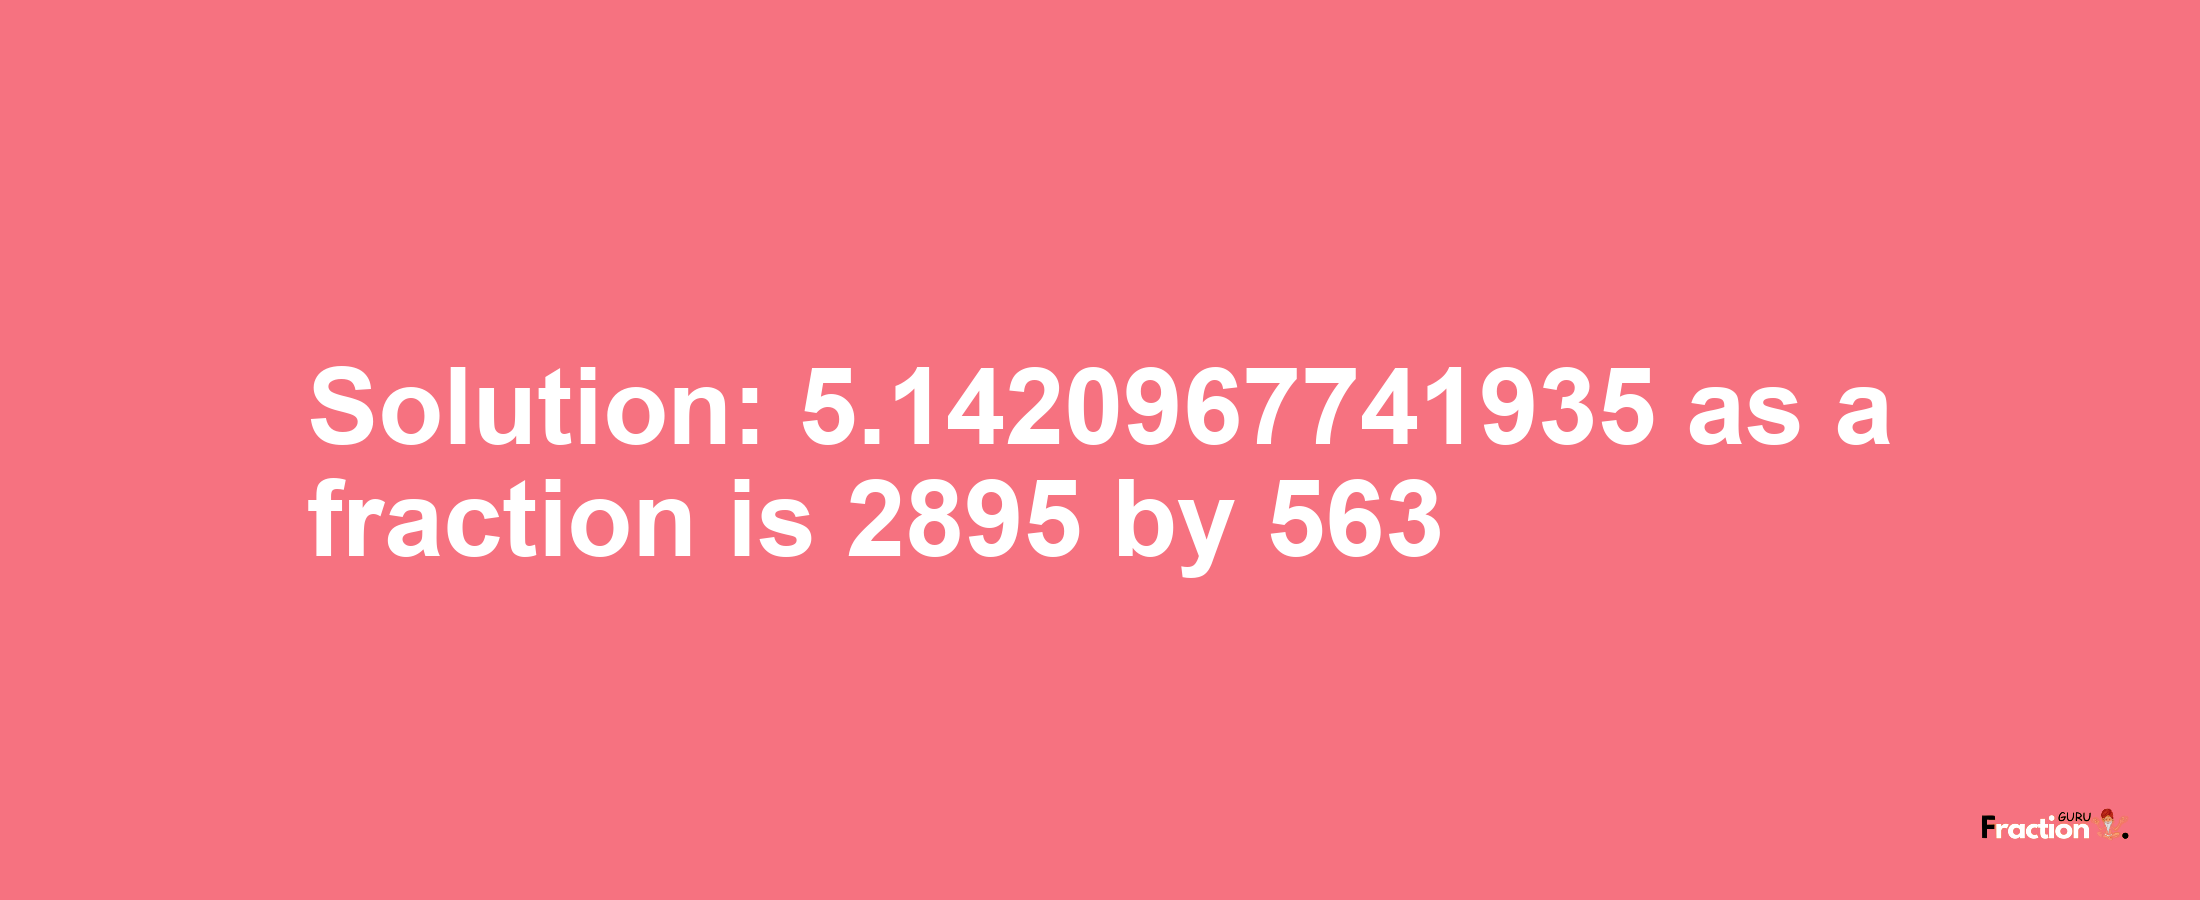 Solution:5.1420967741935 as a fraction is 2895/563